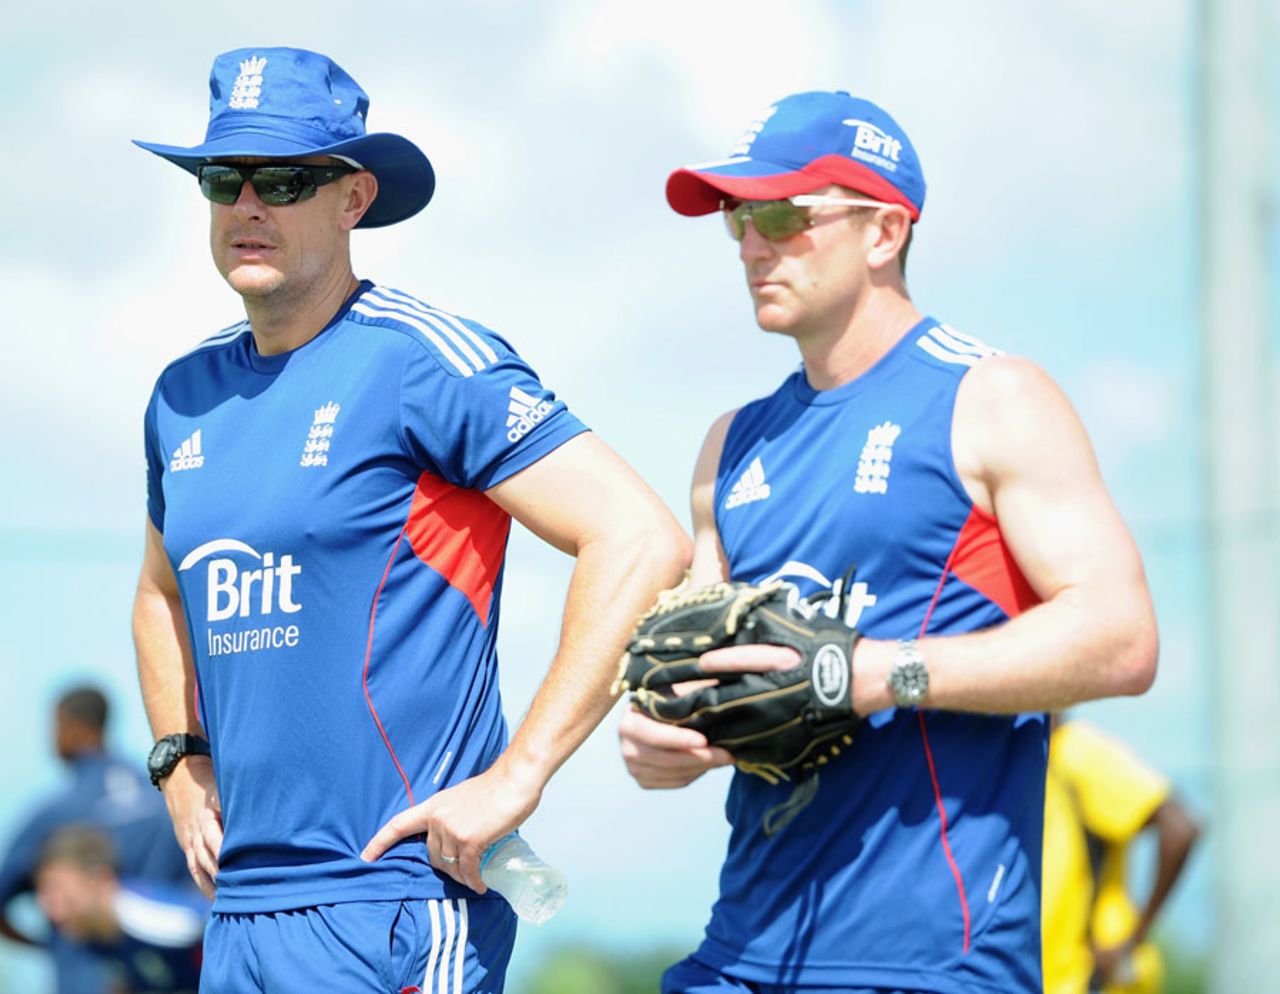 Paul Collingwood and Ashley Giles look on during a nets session, Antigua, February 25, 2014